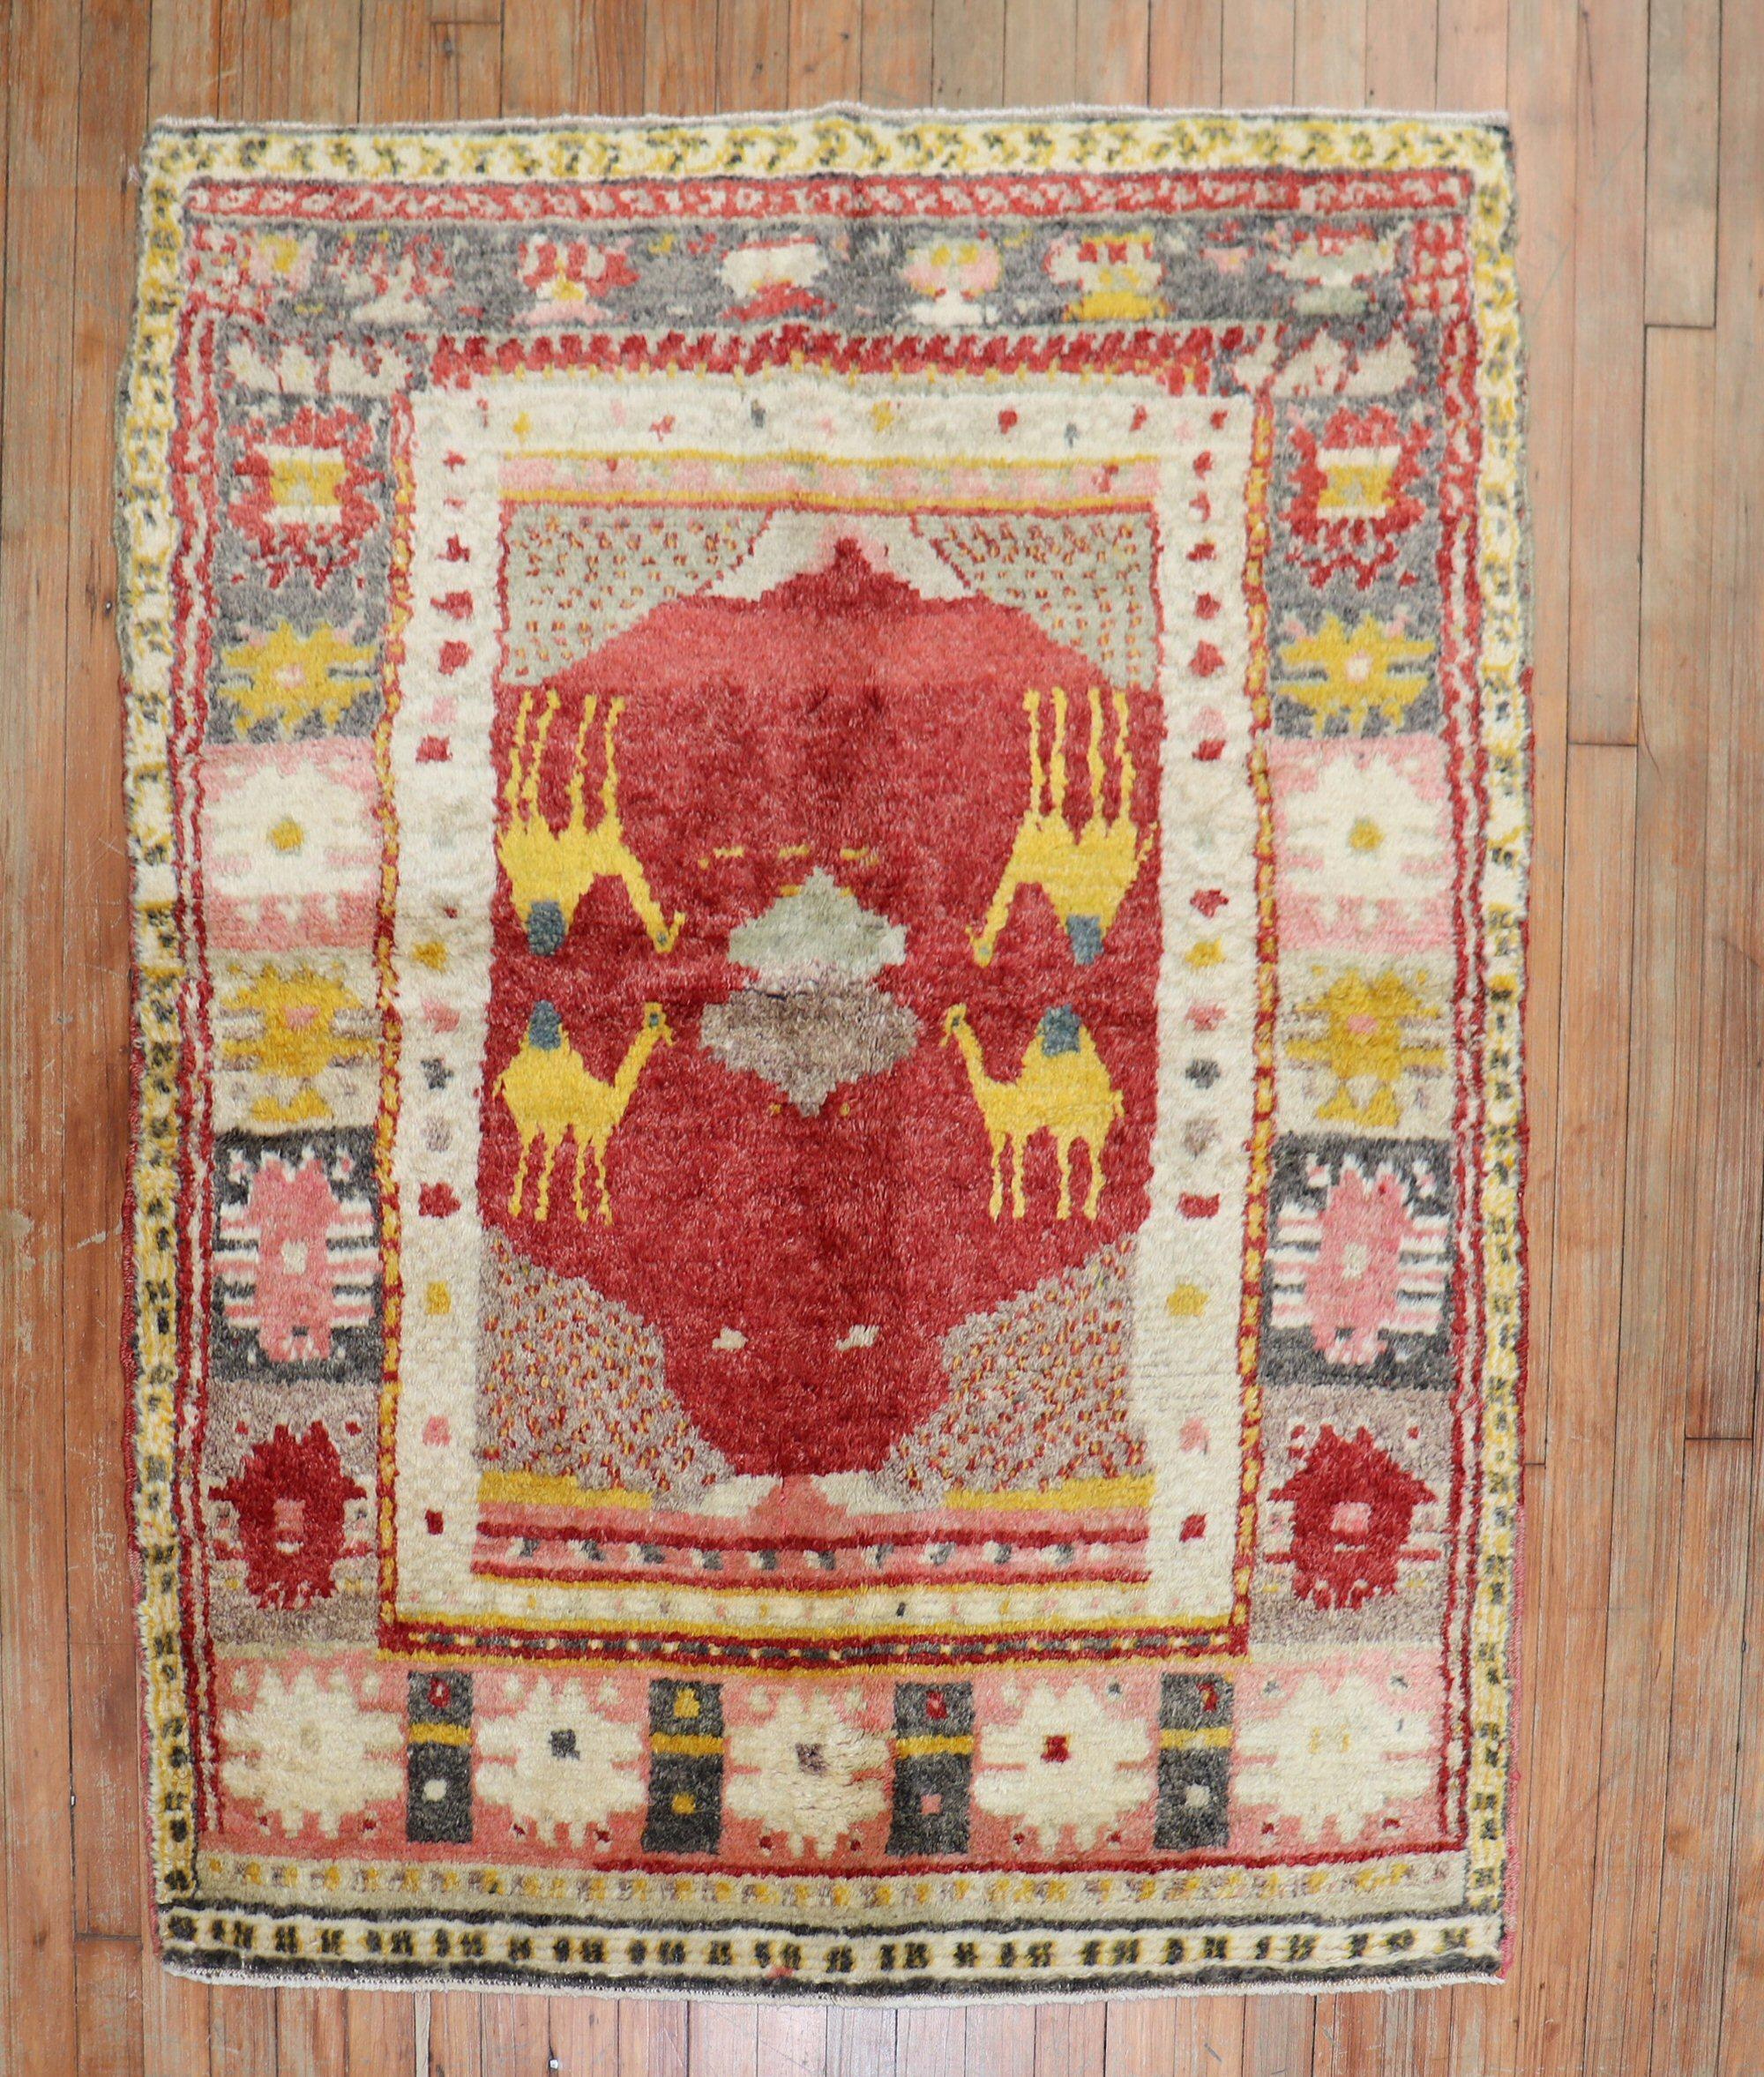 A scatter size village Turkish Rug with 4 gold camels on a bright red field hand-knotted in the middle of the 20th century

rug no. r5501

size 3'9